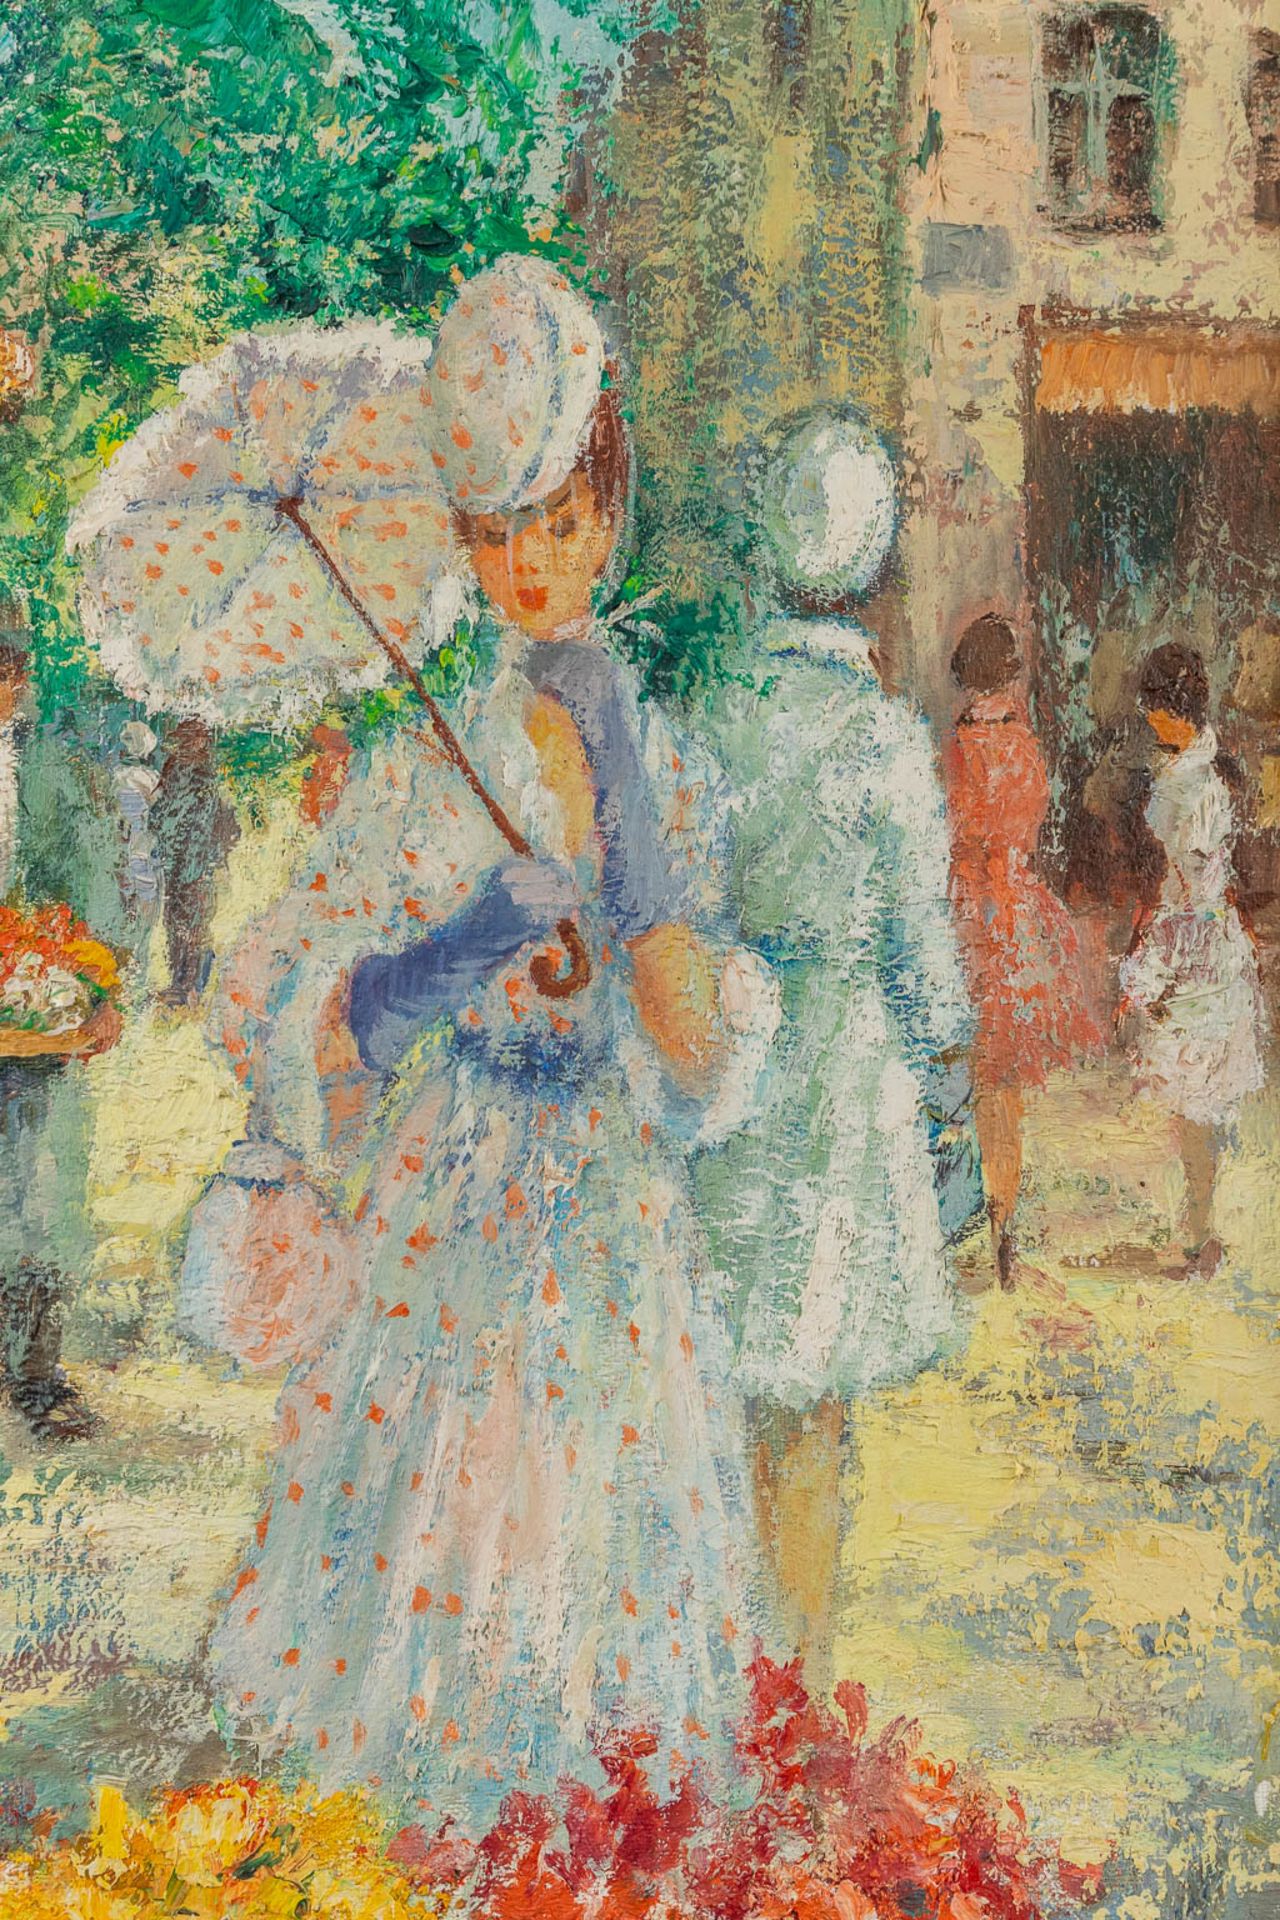 Marguerite AERS (1918-1995) 'The Flower Market' oil on canvas. (W:45 x H:55 cm) - Image 6 of 8